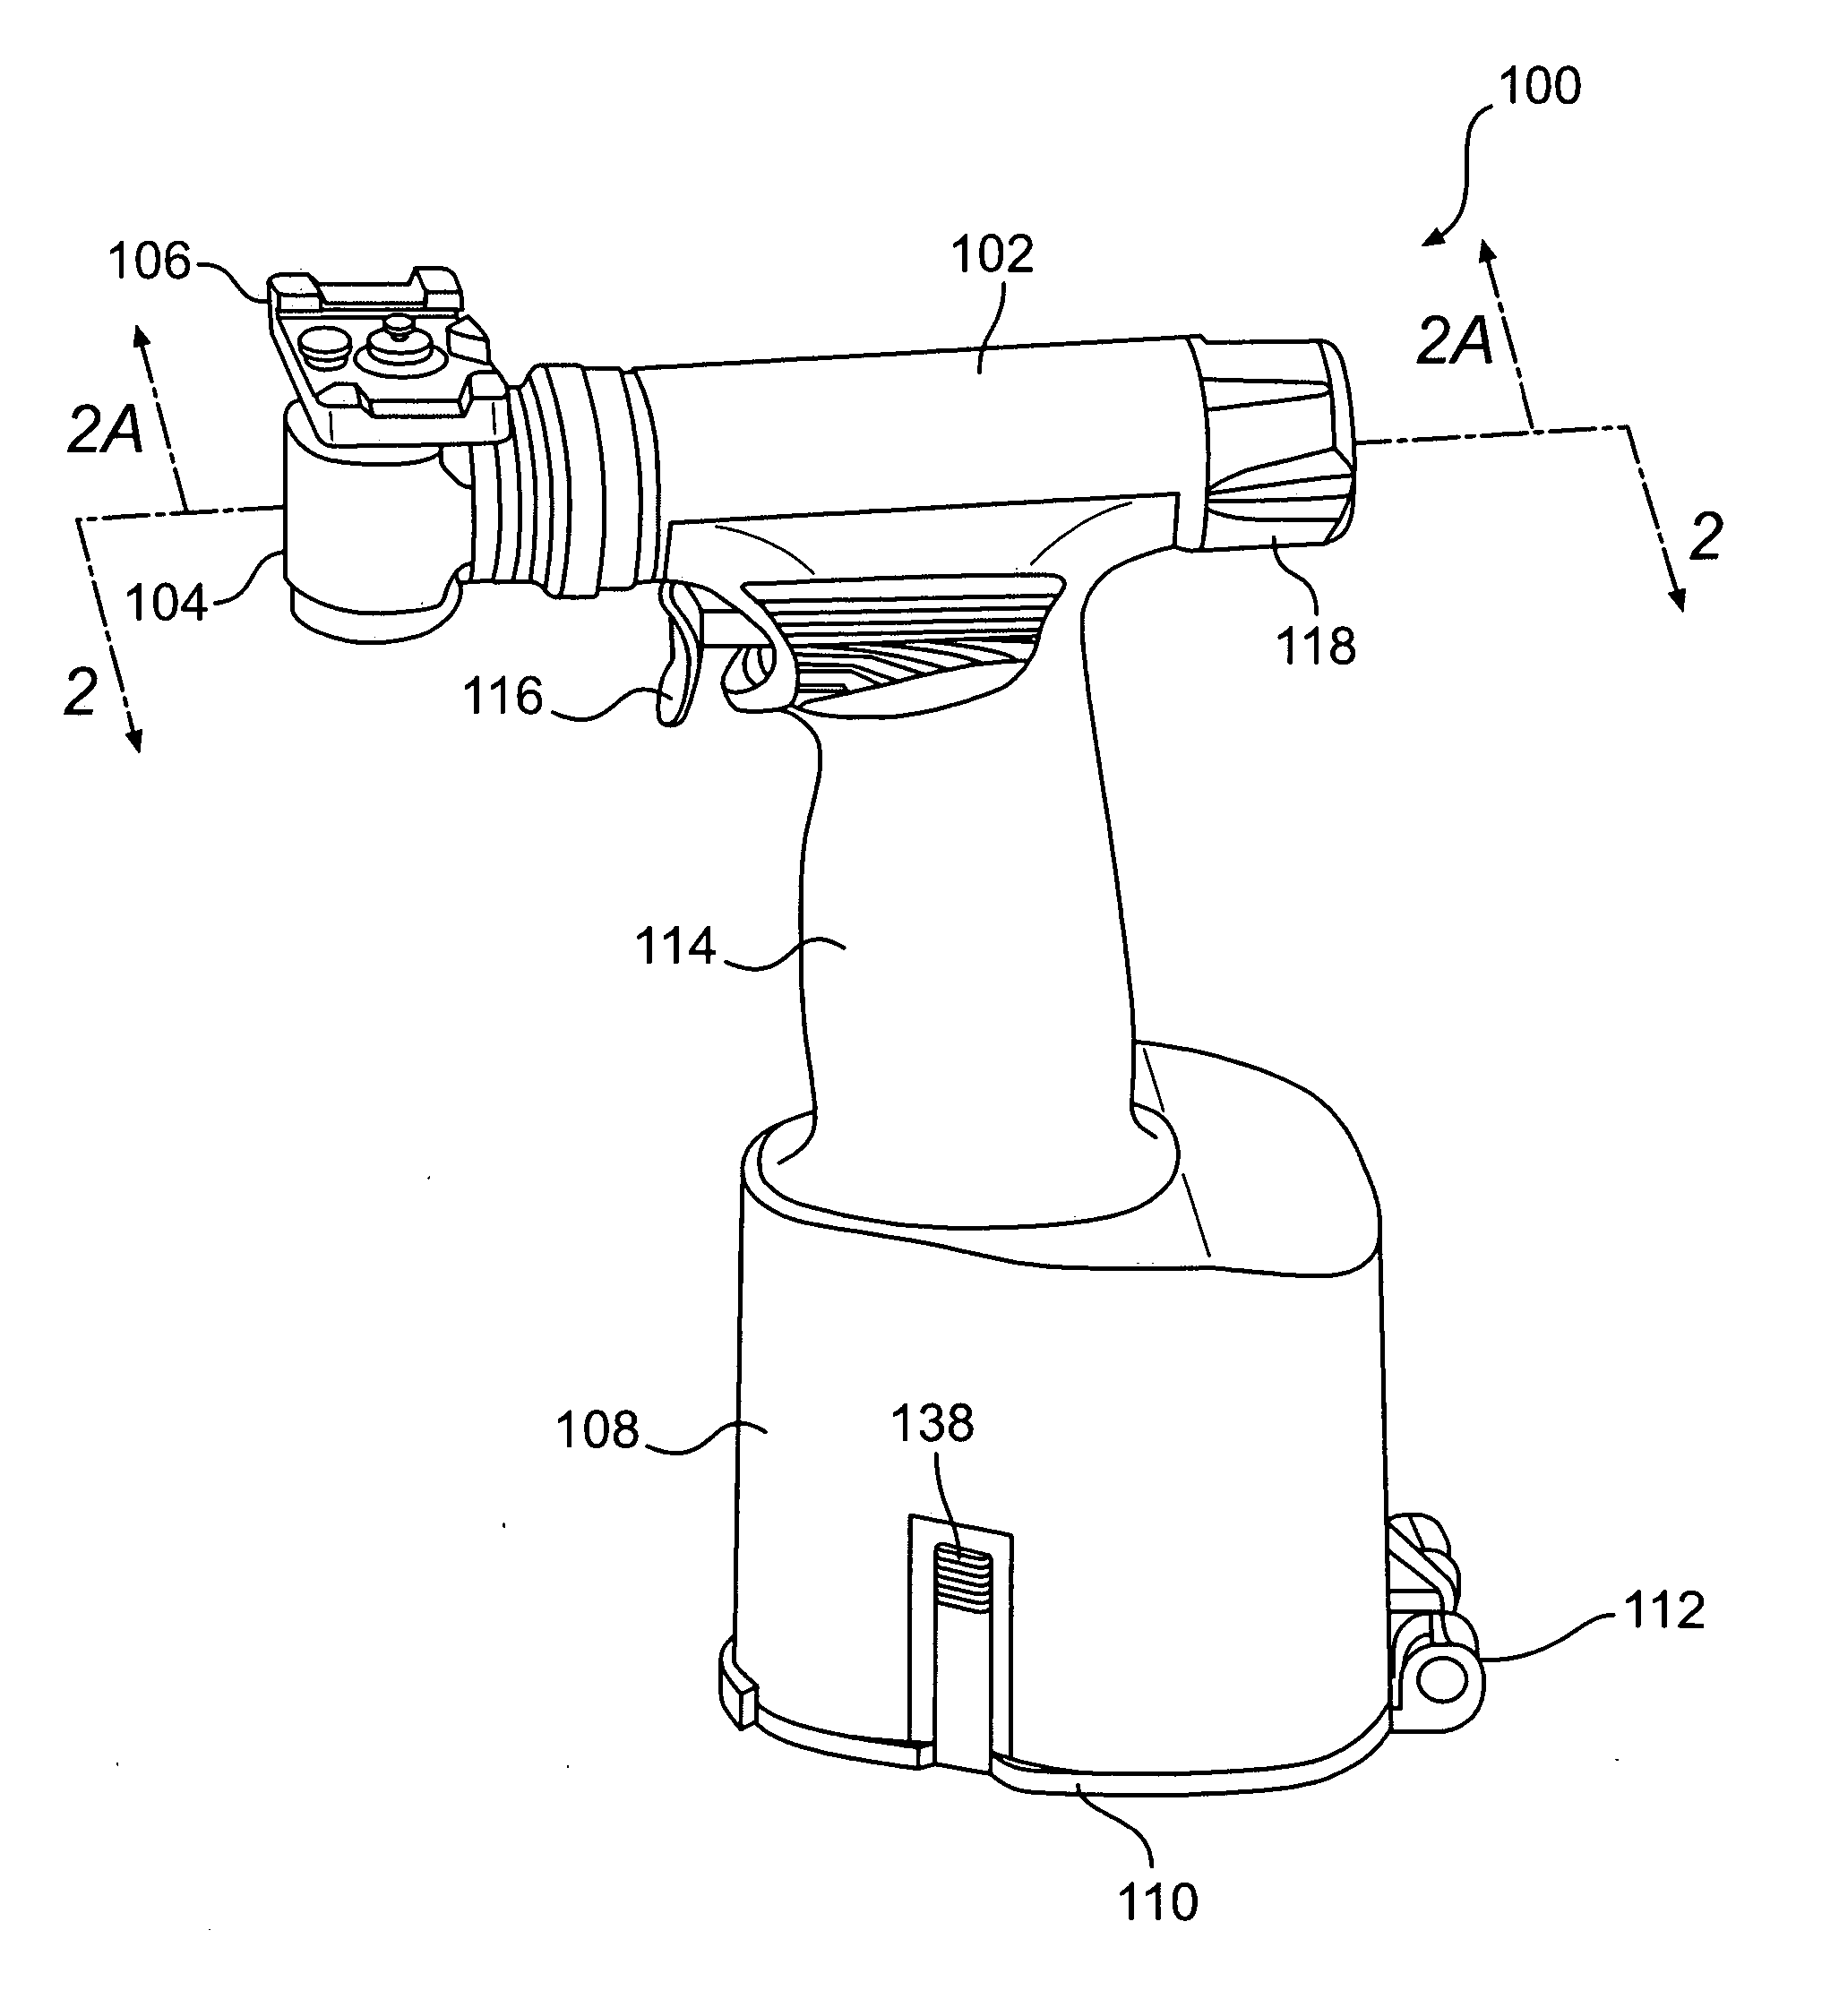 Surgical apparatus and tools for same